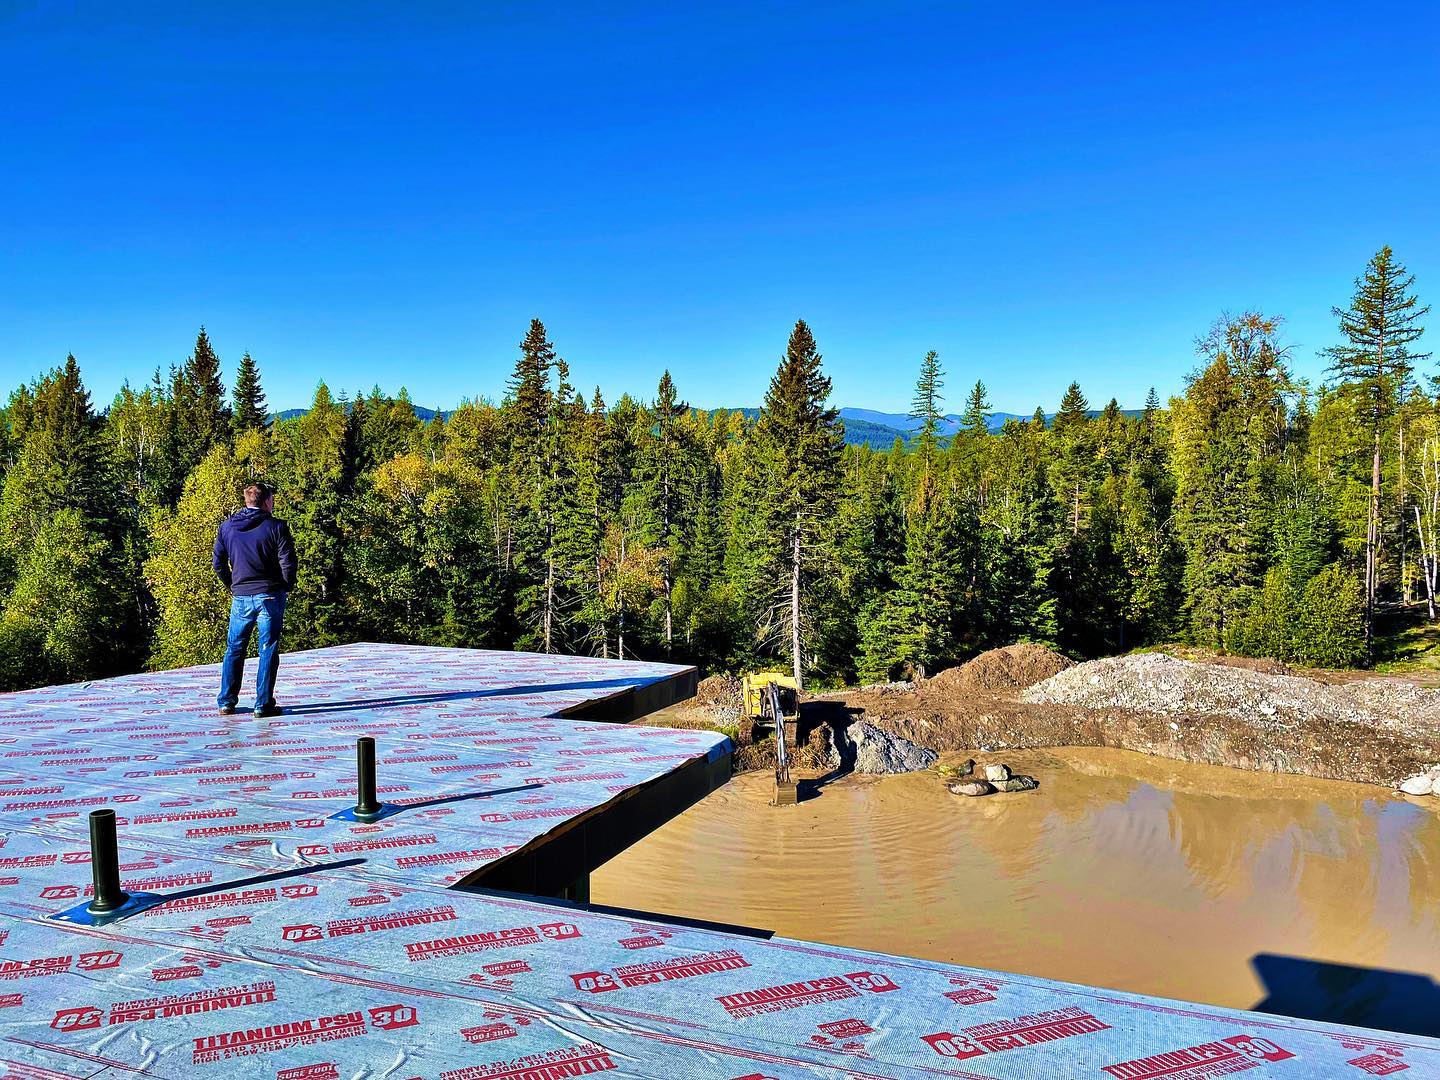 Just another lovely morning on a Montana jobsite! whitefish custom home builder